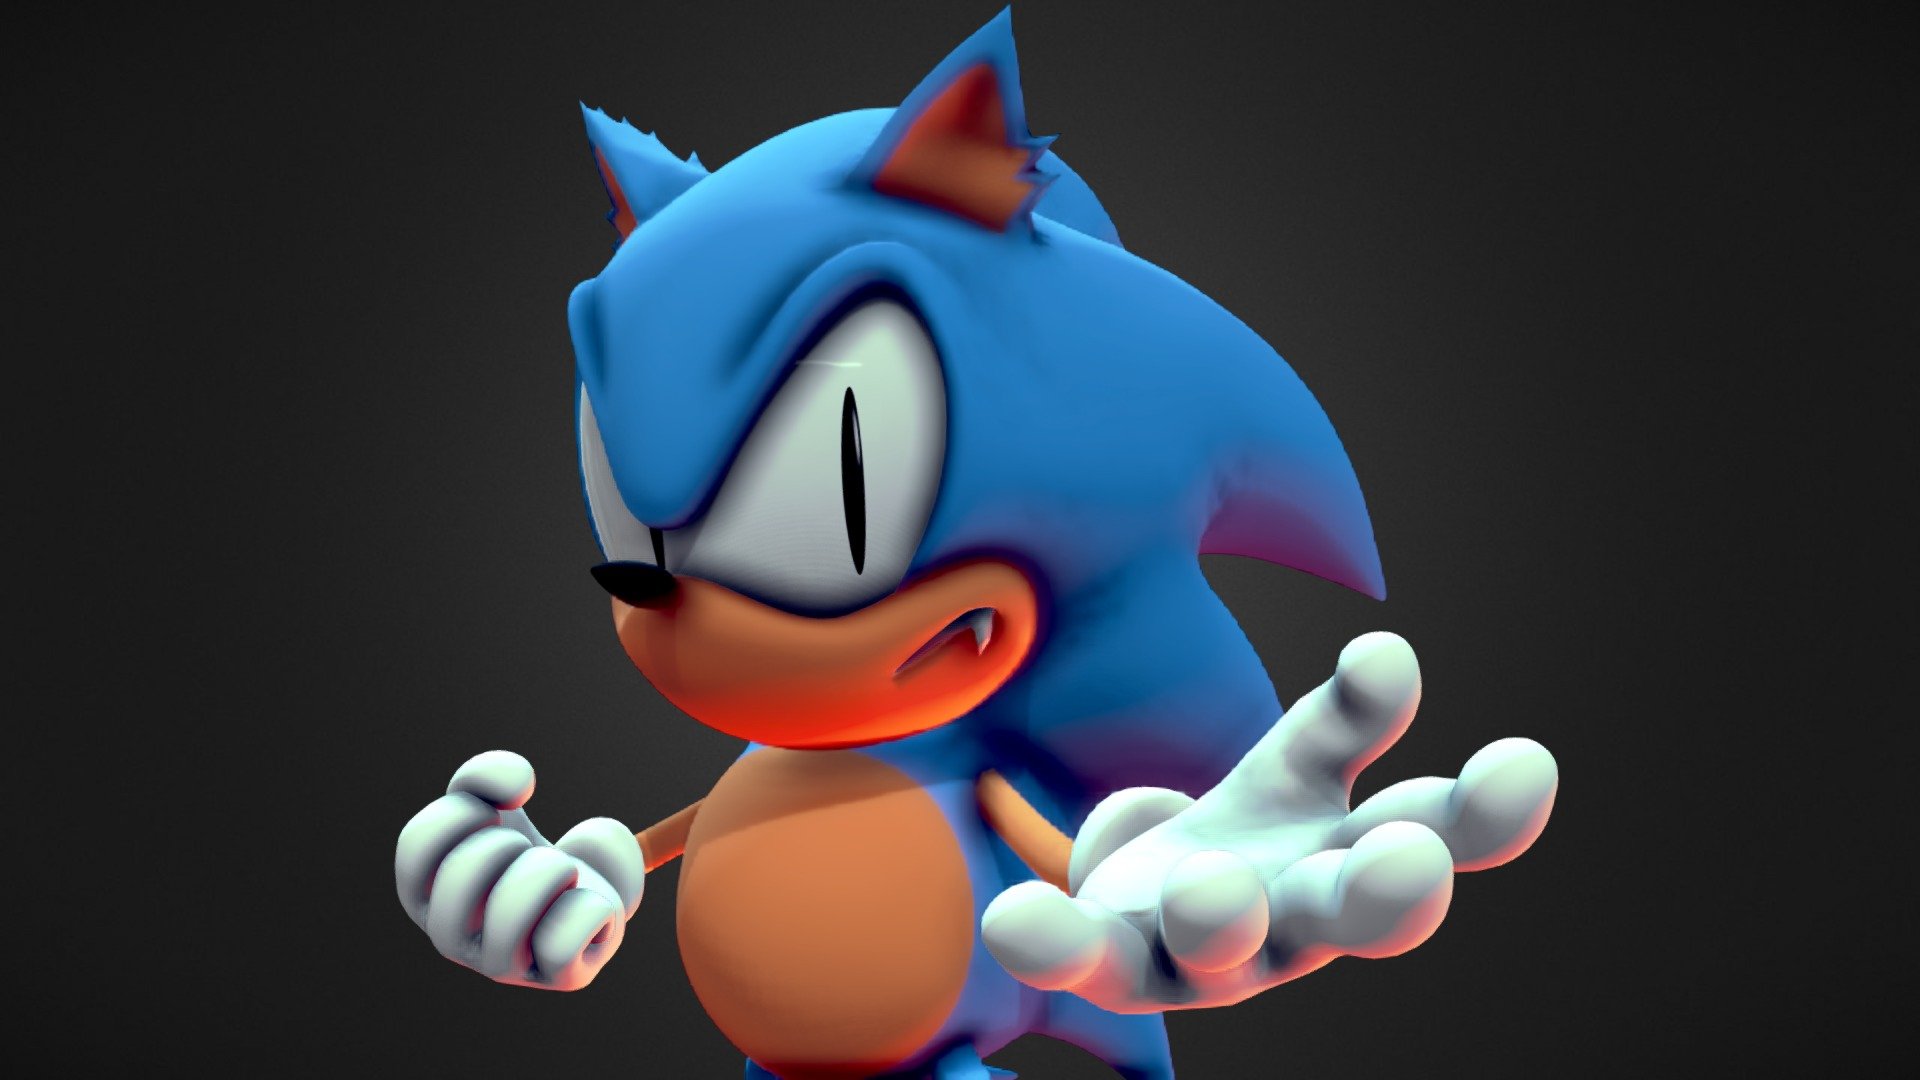 Model based in the character extra life sonic from sonic the comic
 - Extra life sonic - 3D model by Gabrielgt16 3d model